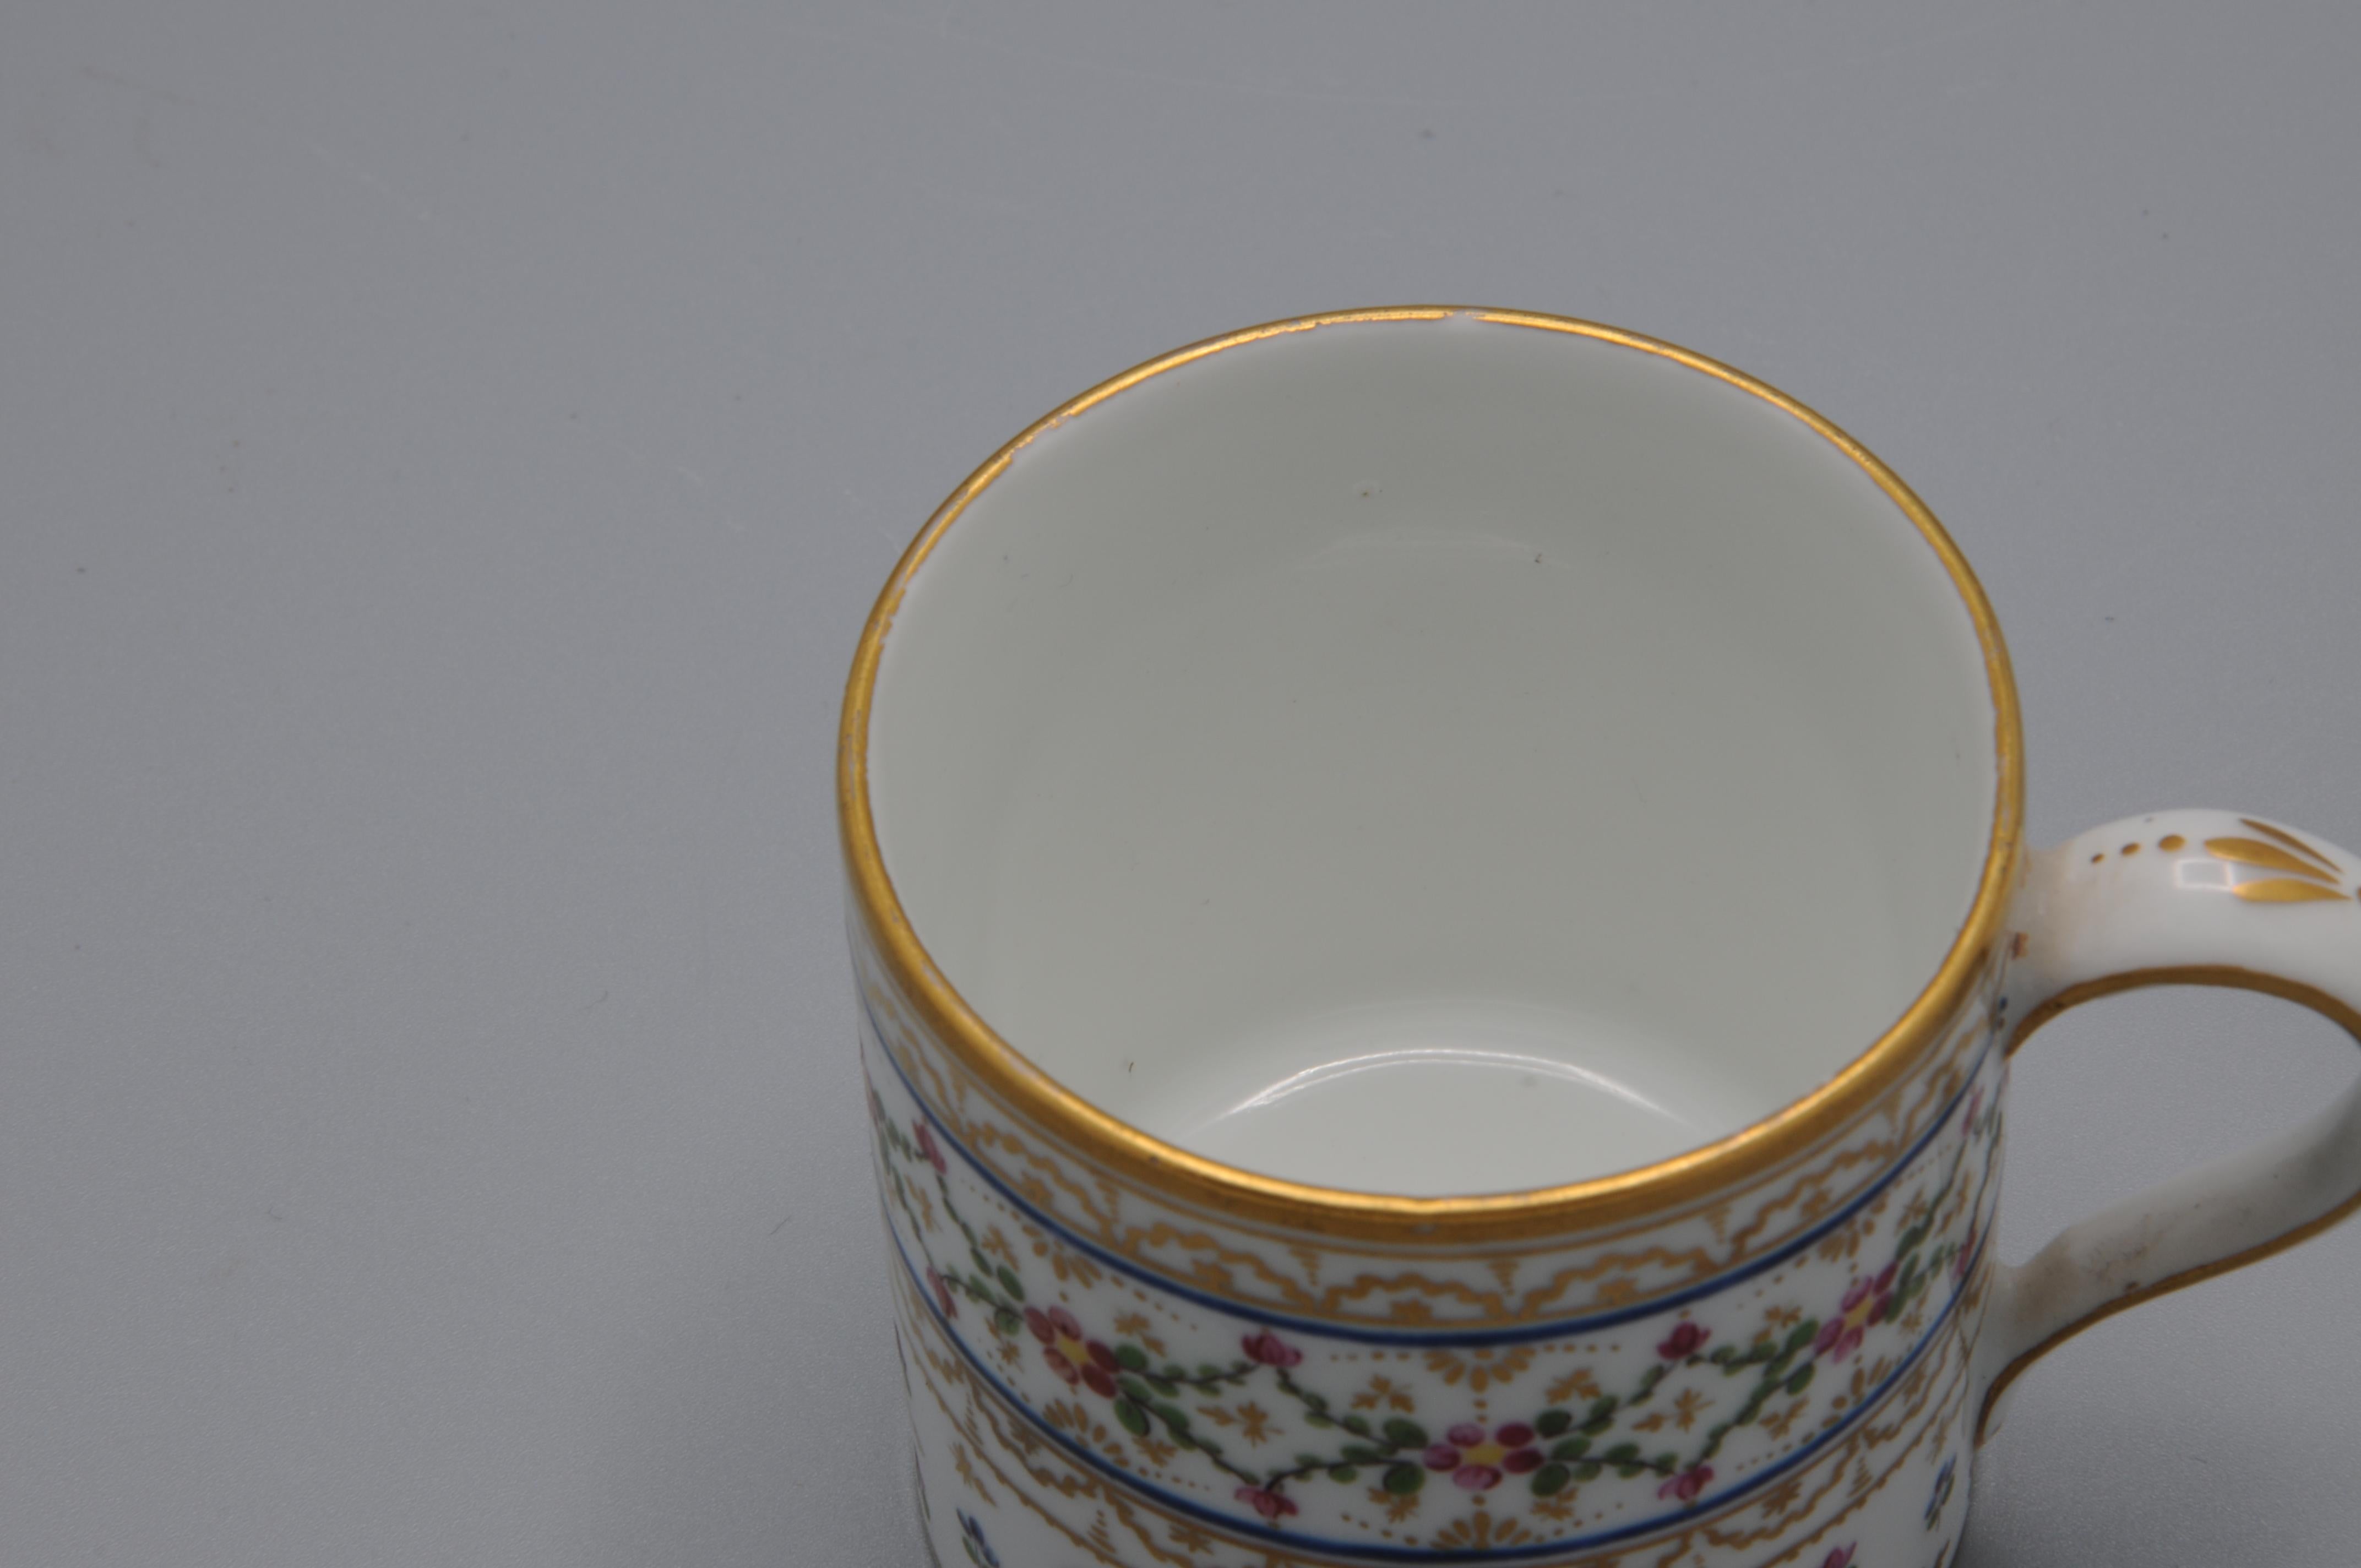 André Leboeuf, Manufacture à la Reine' - Cup and saucer 'Litron', late 18th For Sale 5